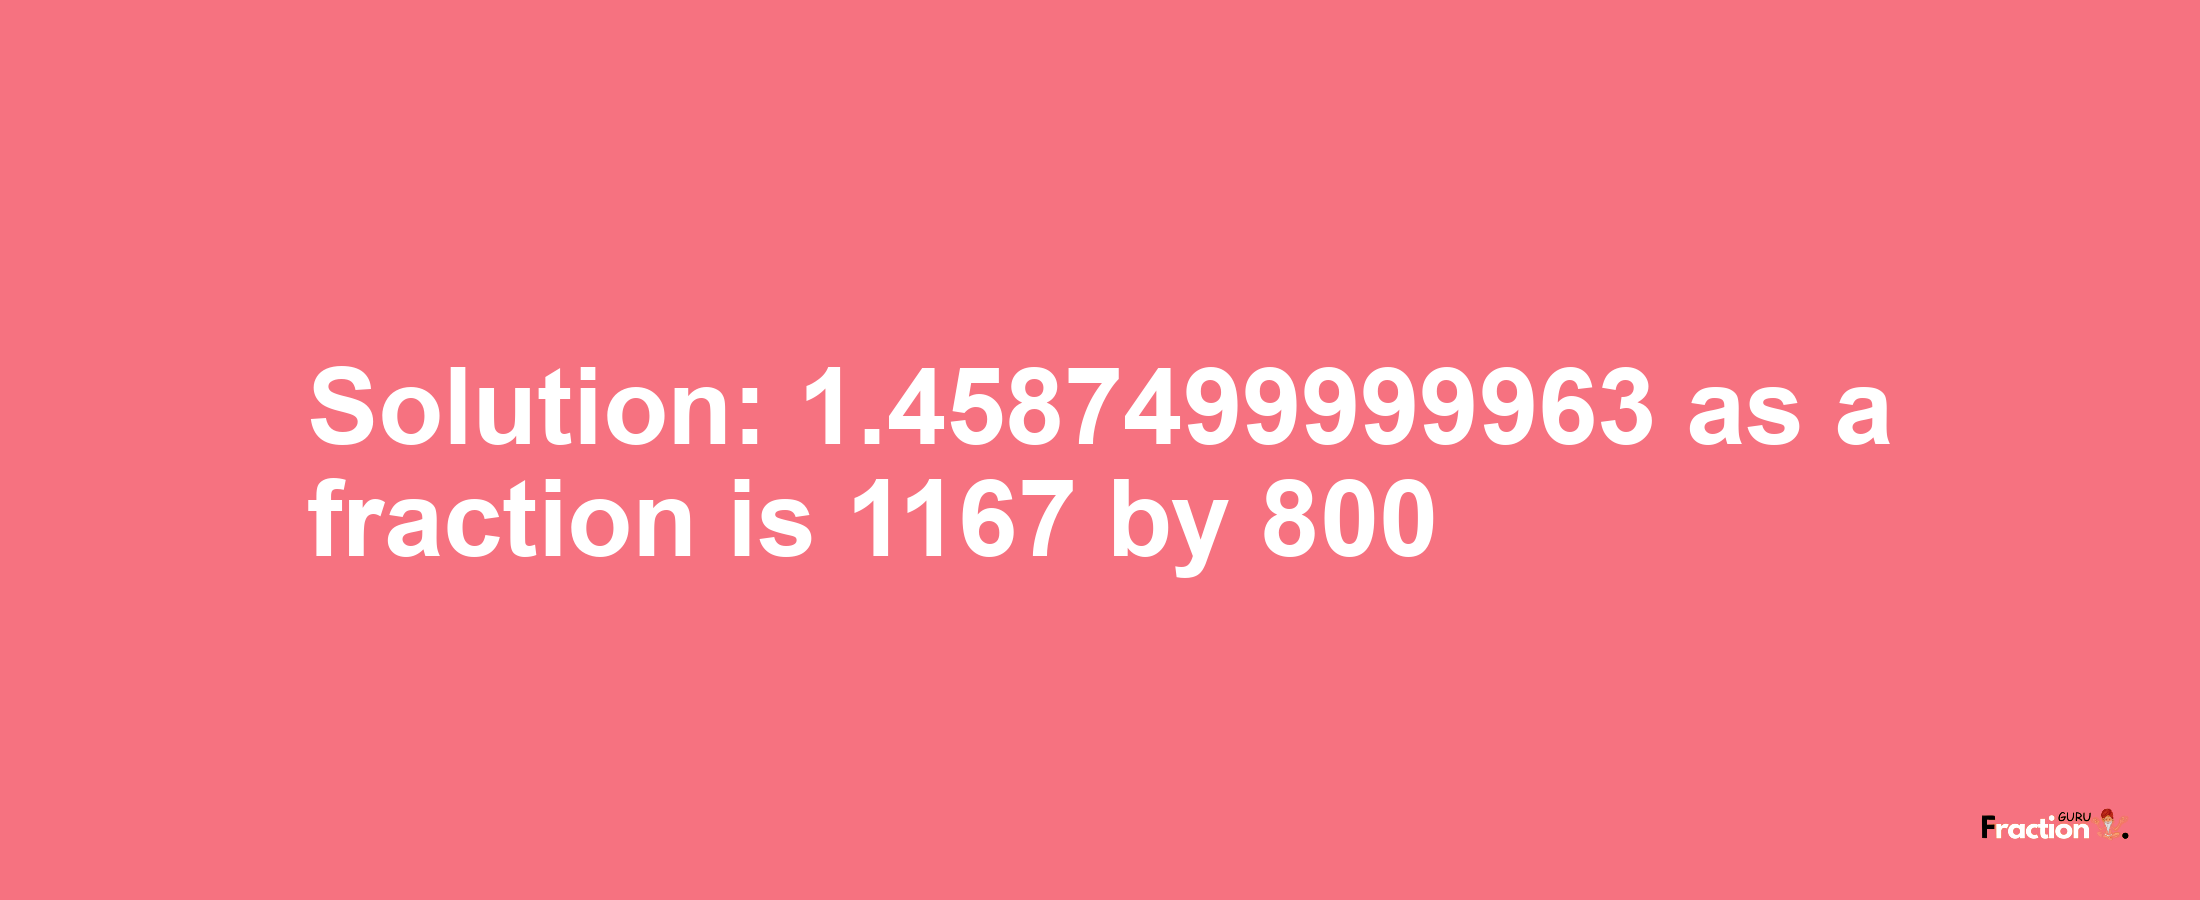 Solution:1.4587499999963 as a fraction is 1167/800